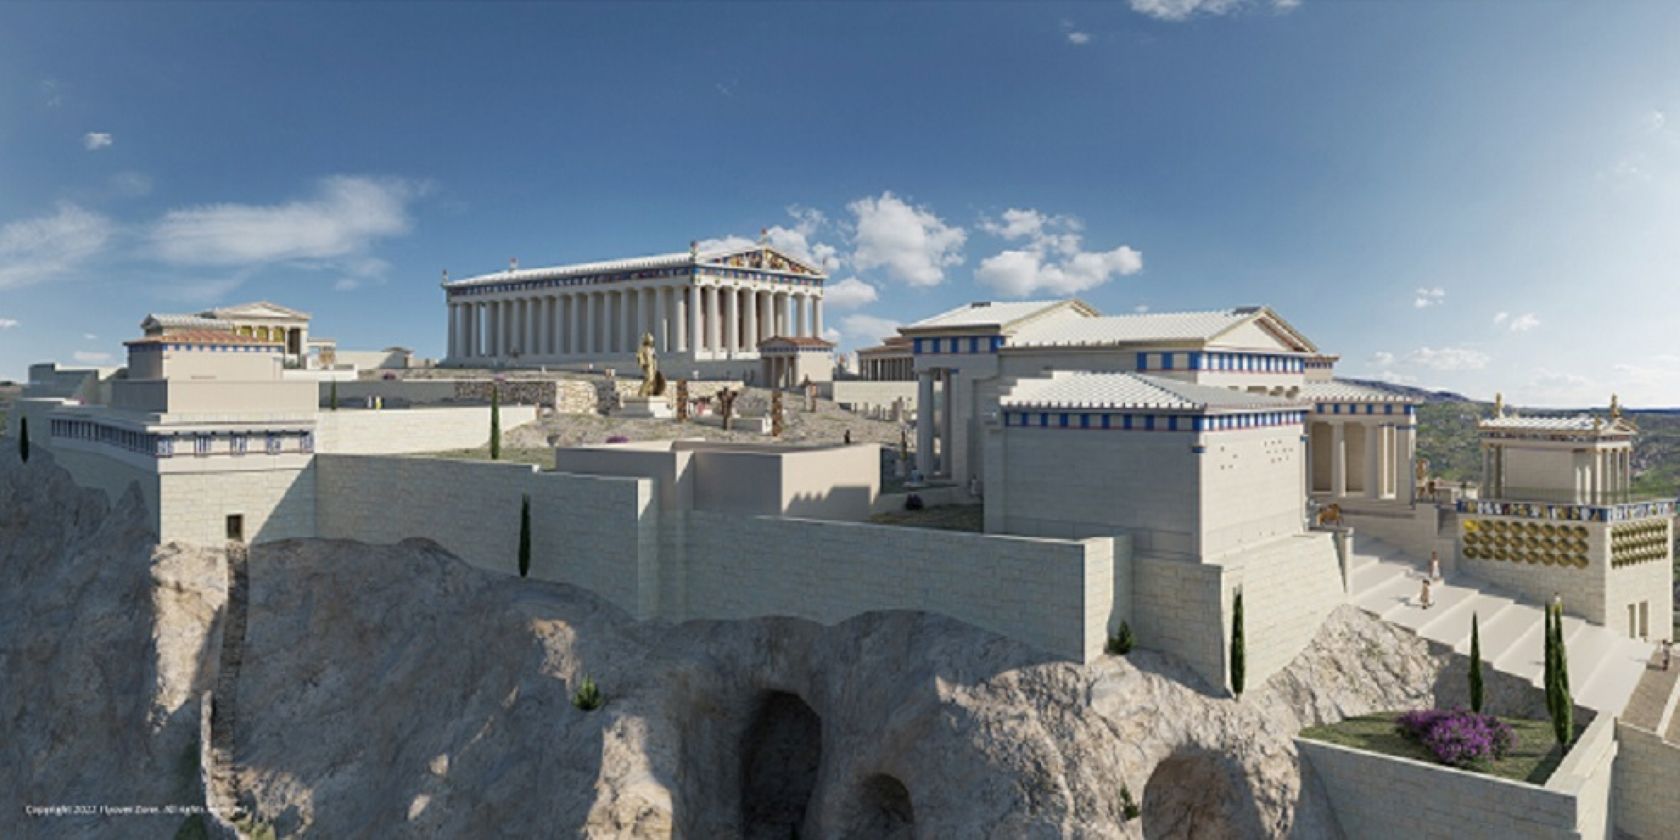 A virtual reconstruction of an ancient site from Flyover Zone for Yorescape